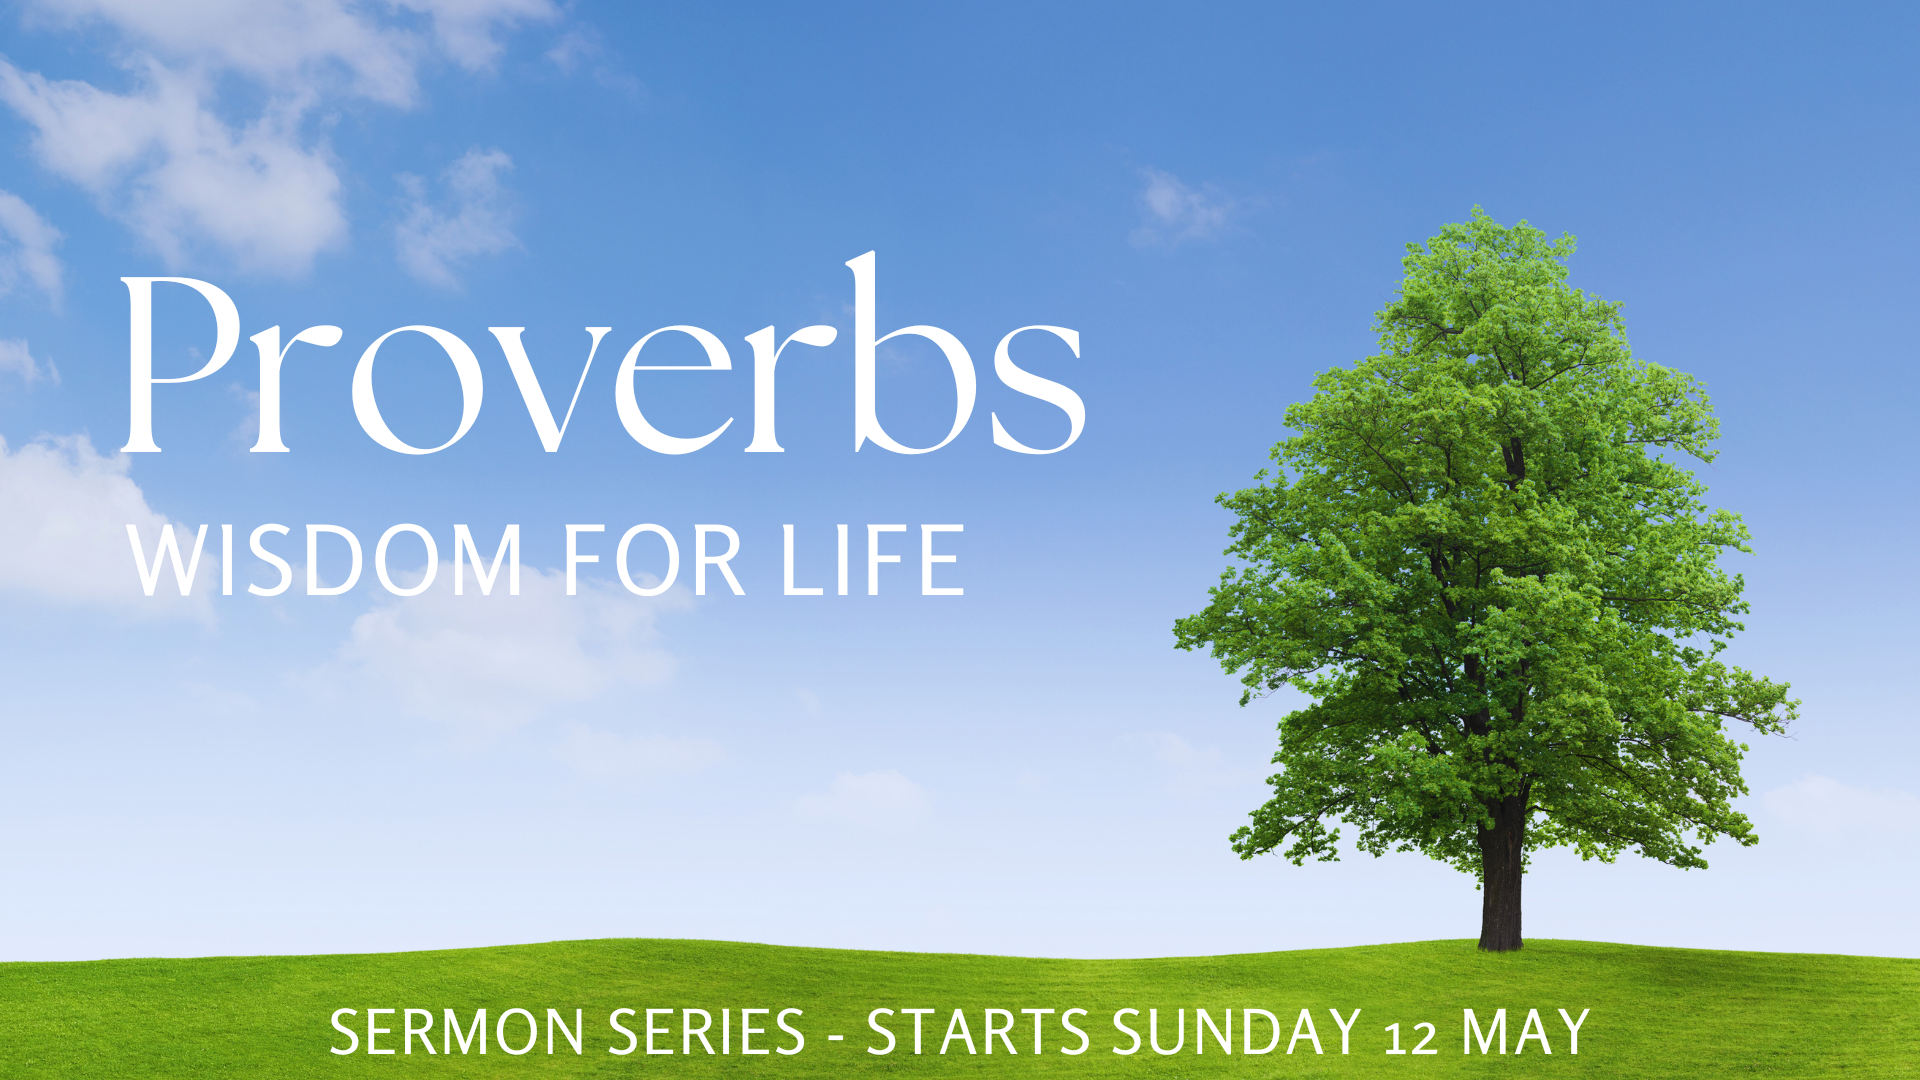 Proverbs wisdom for life sermon series 16.9 for website.png